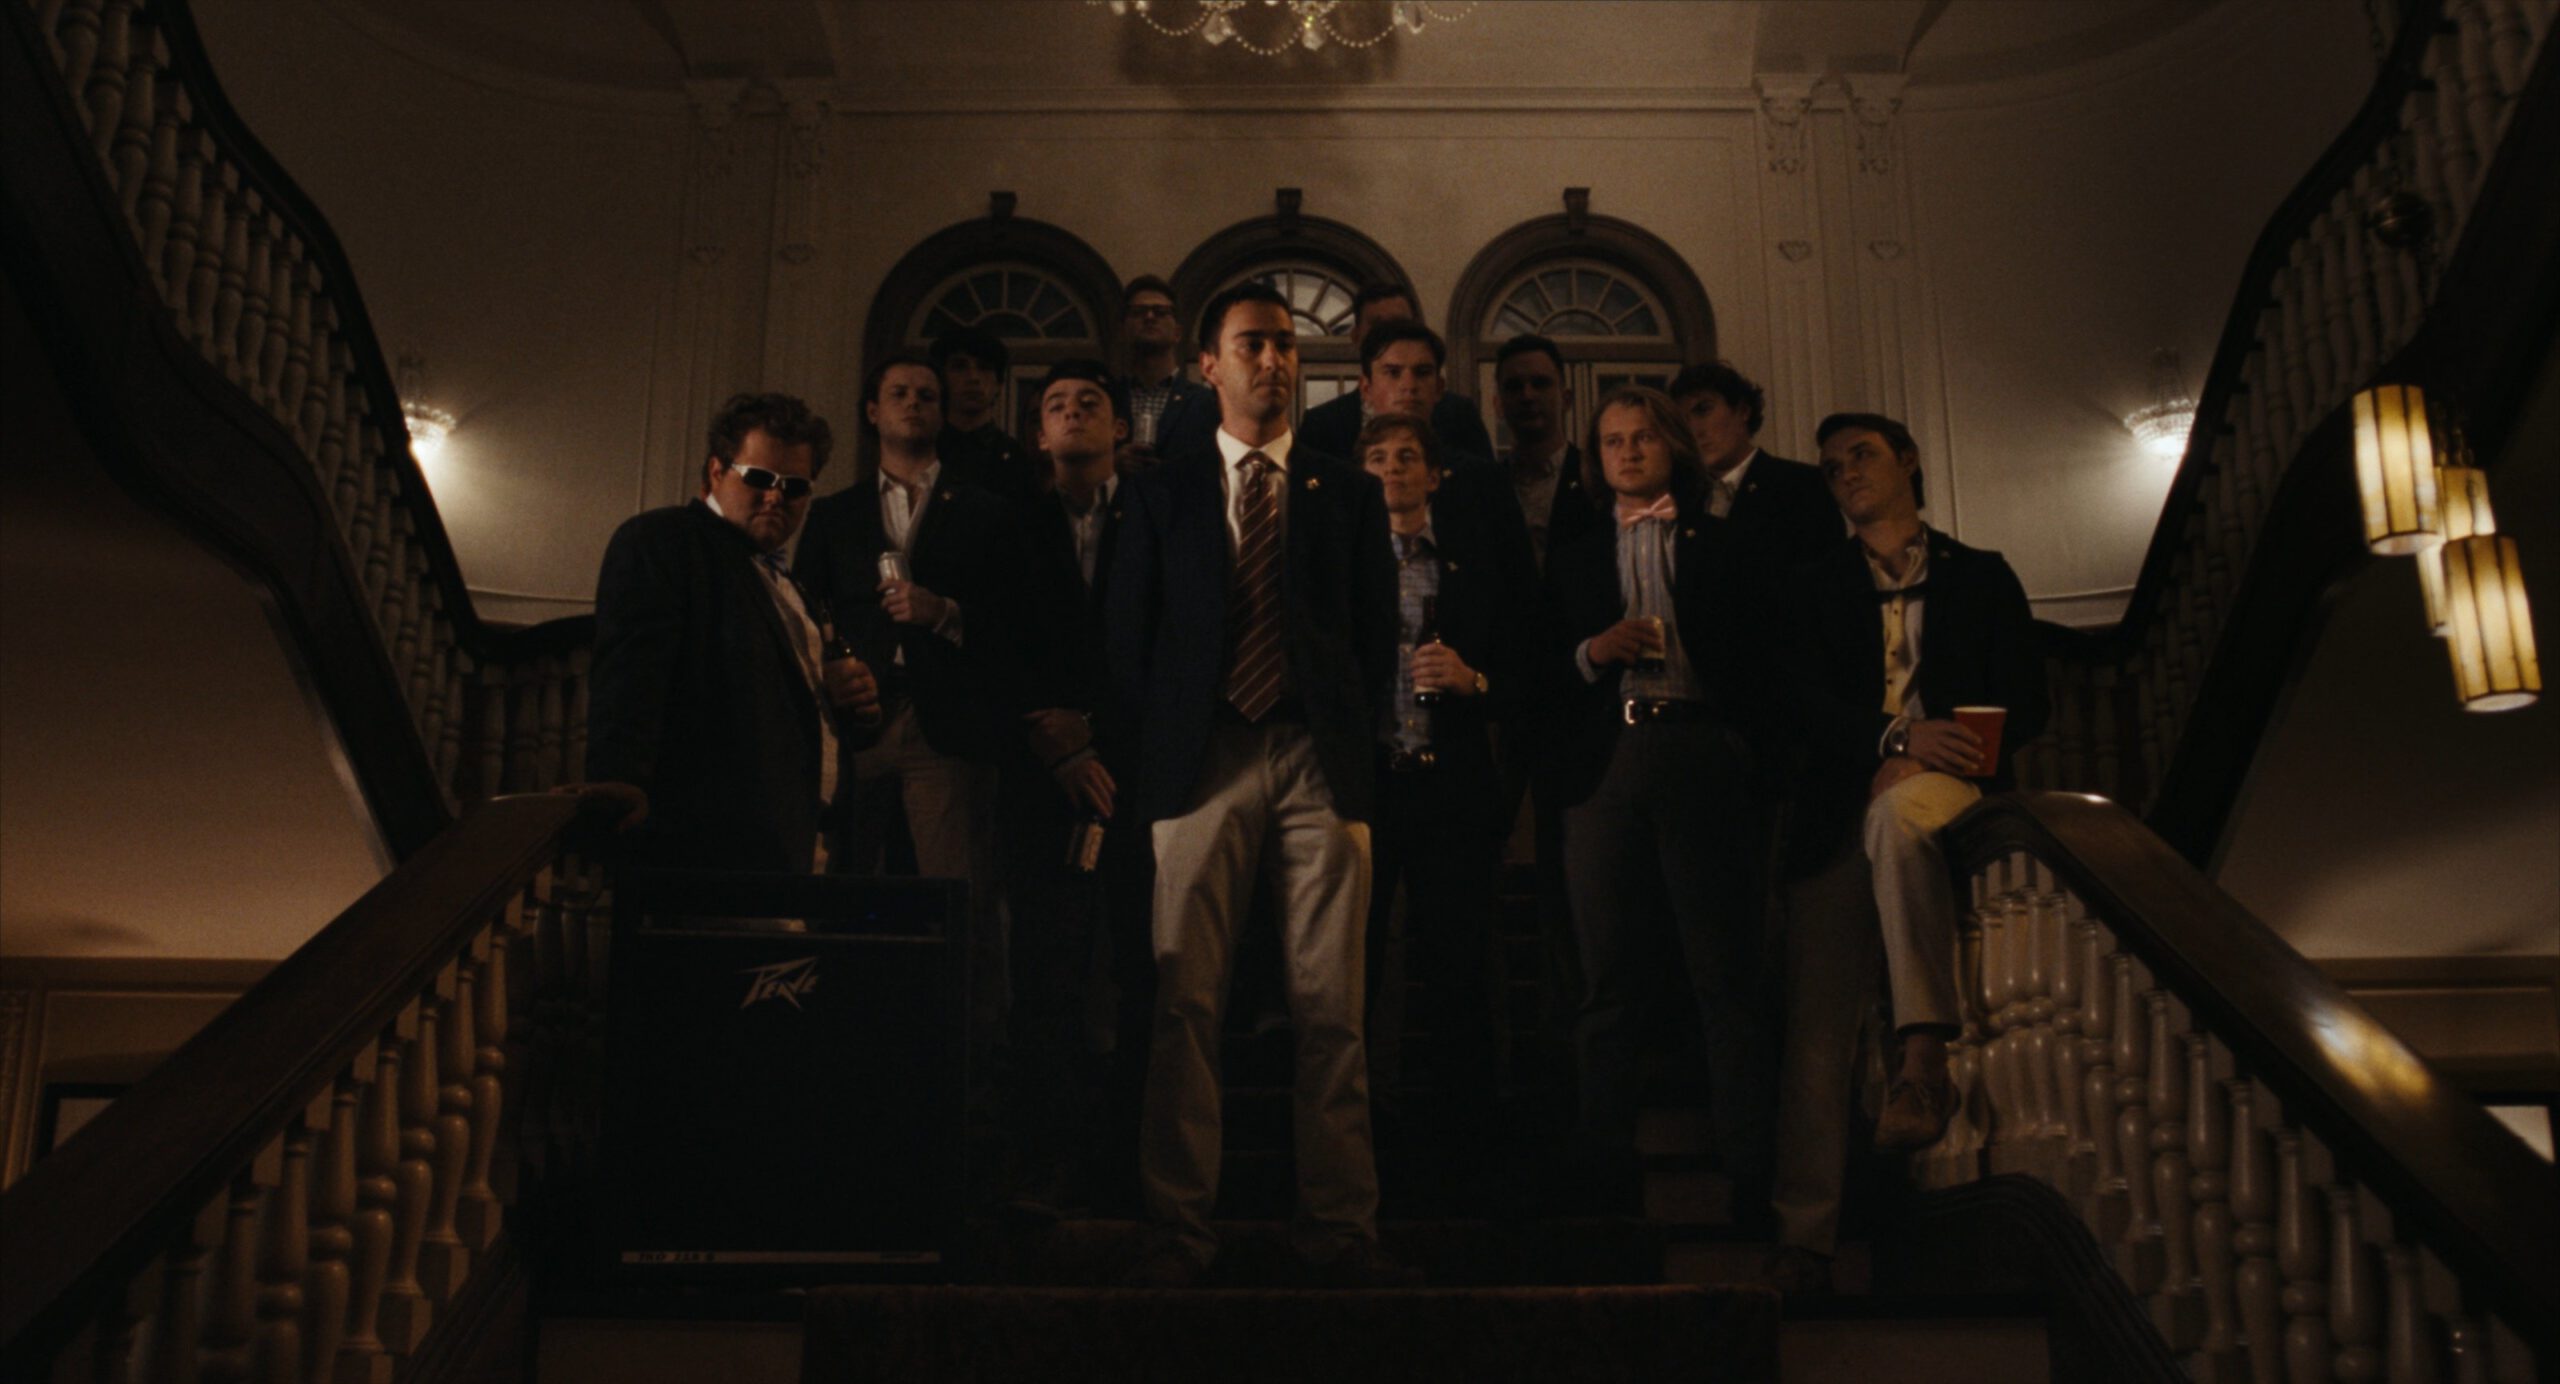 A group of frat brothers in suits stand on a grand staircase in a frat house.